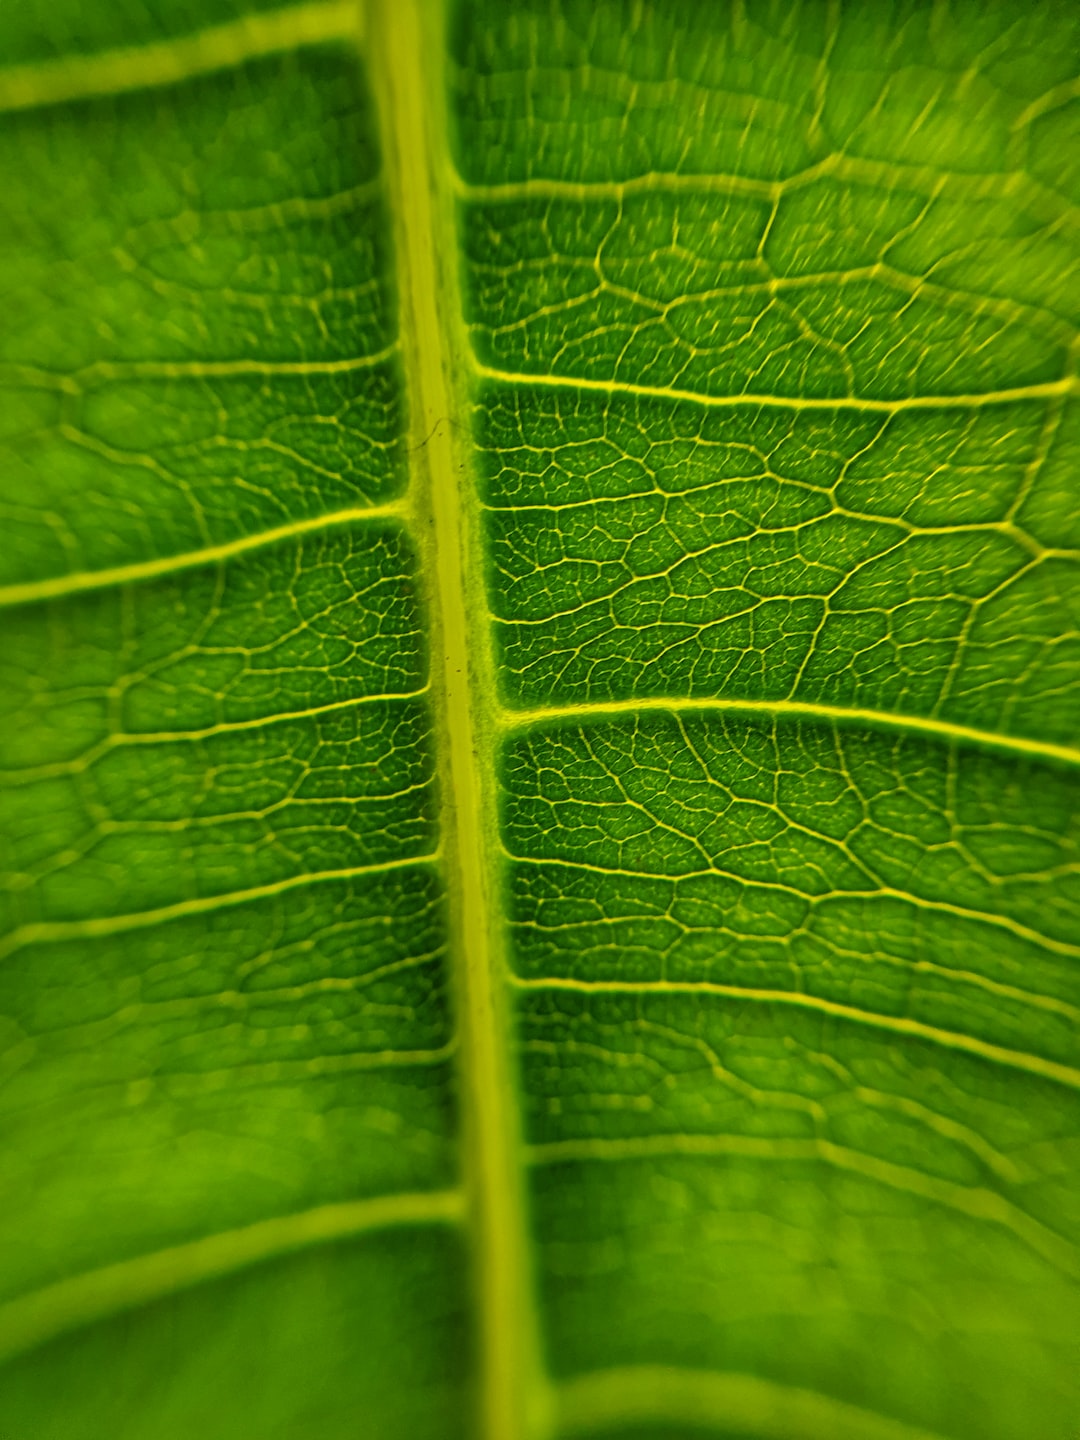 ➝ Avocado leaf macro shot ➝ Object: Avocado, 'persea americana'➝ If you want, credit me by linking back to my unsplash profile or Instagram ➝ ❝Have a smashing day, Tobi